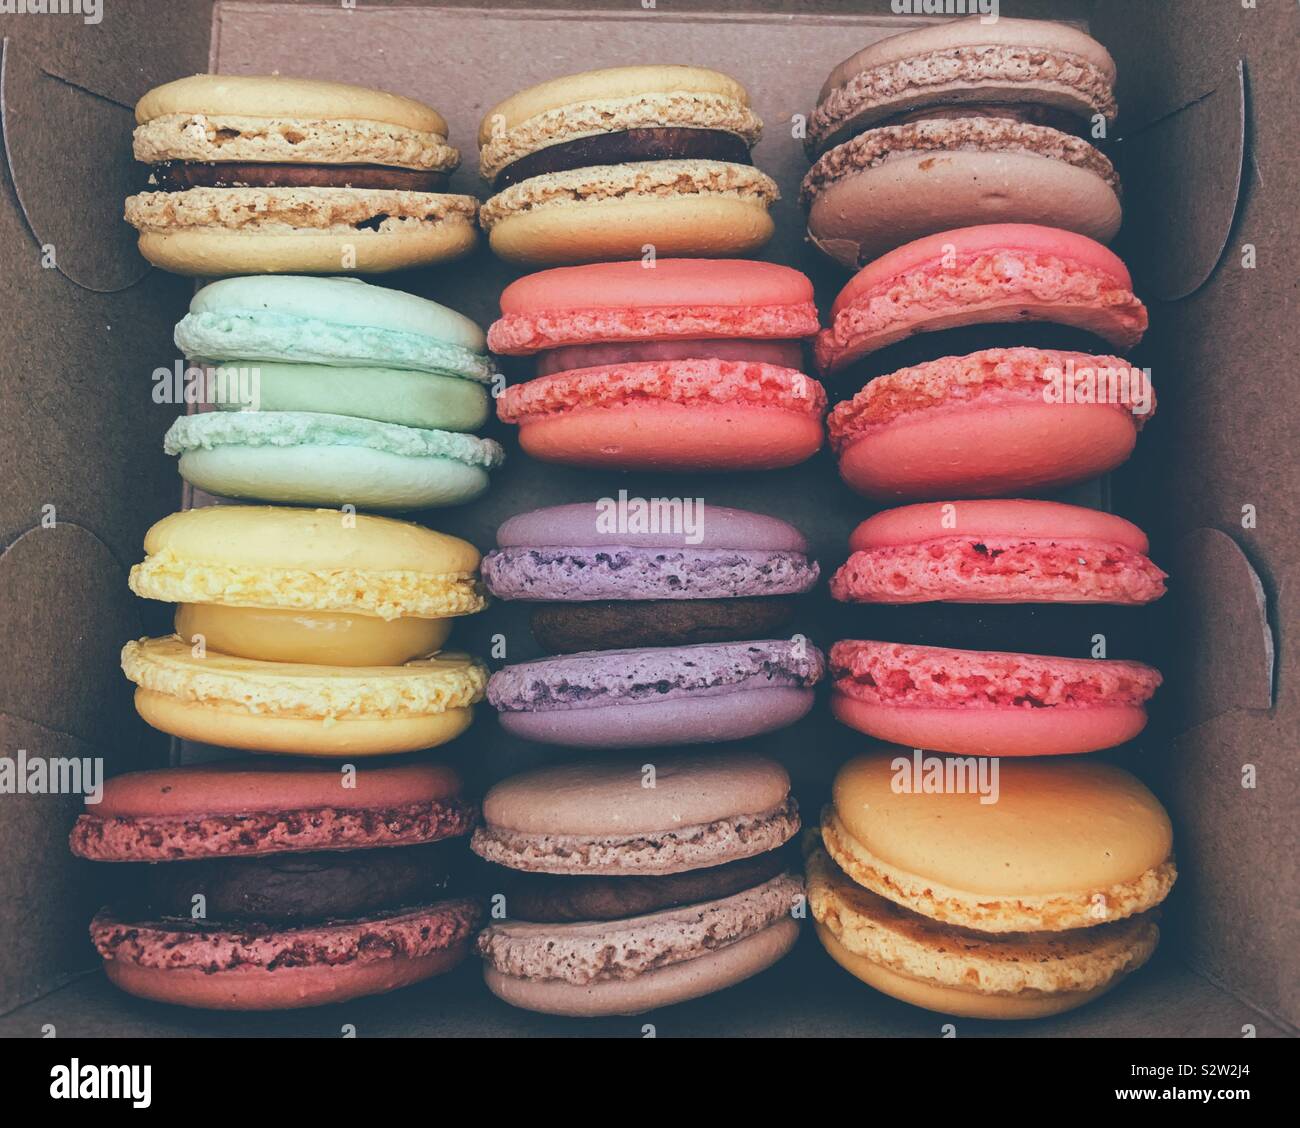 Assortment colourful fresh macarons in a paper box. Stock Photo